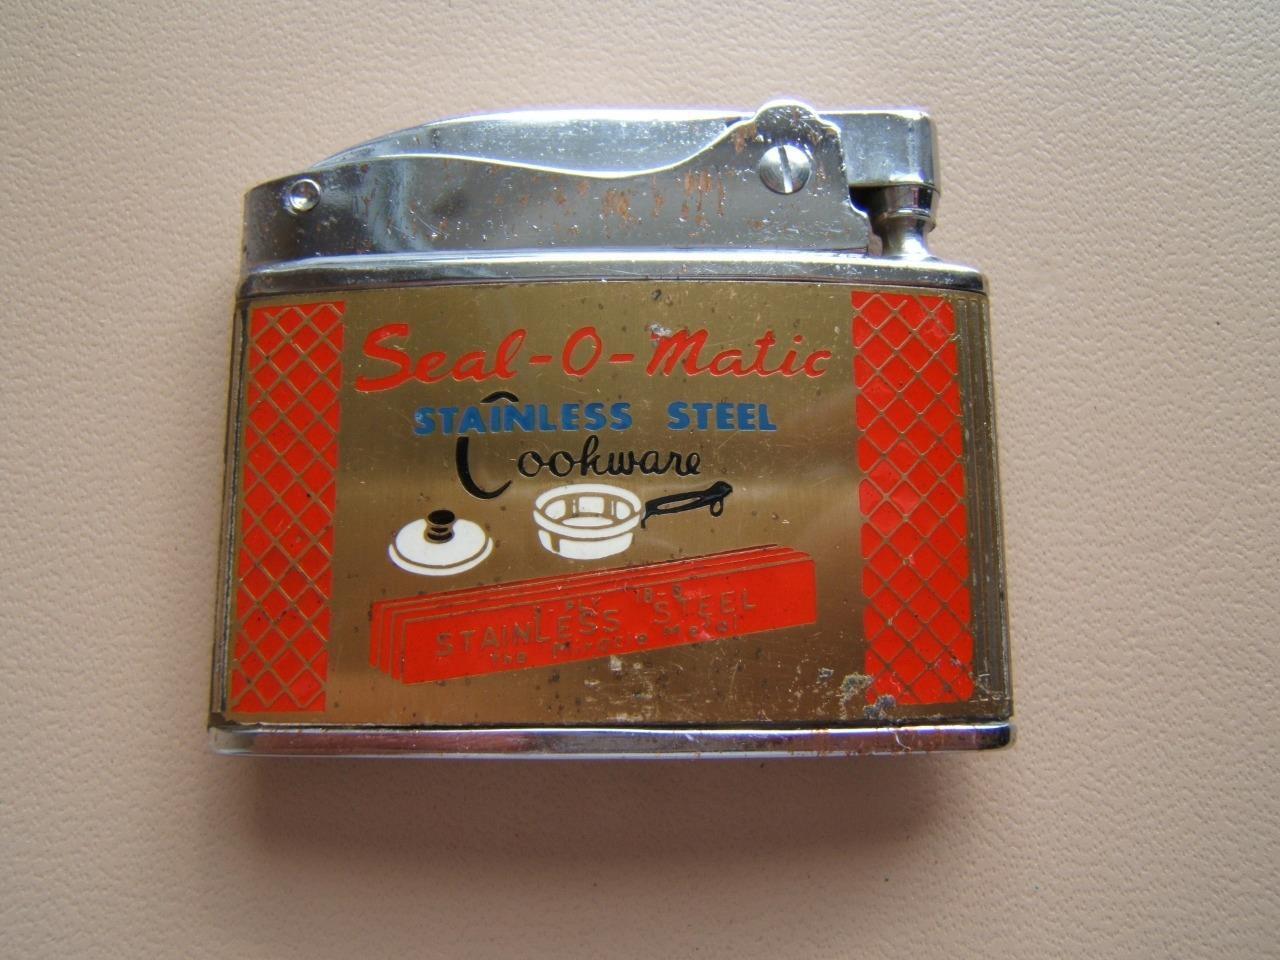 VINTAGE ROLEX CIGARETTE LIGHTER ADVERTISING SEAL-O-MATIC STAINLESS COOKWARE